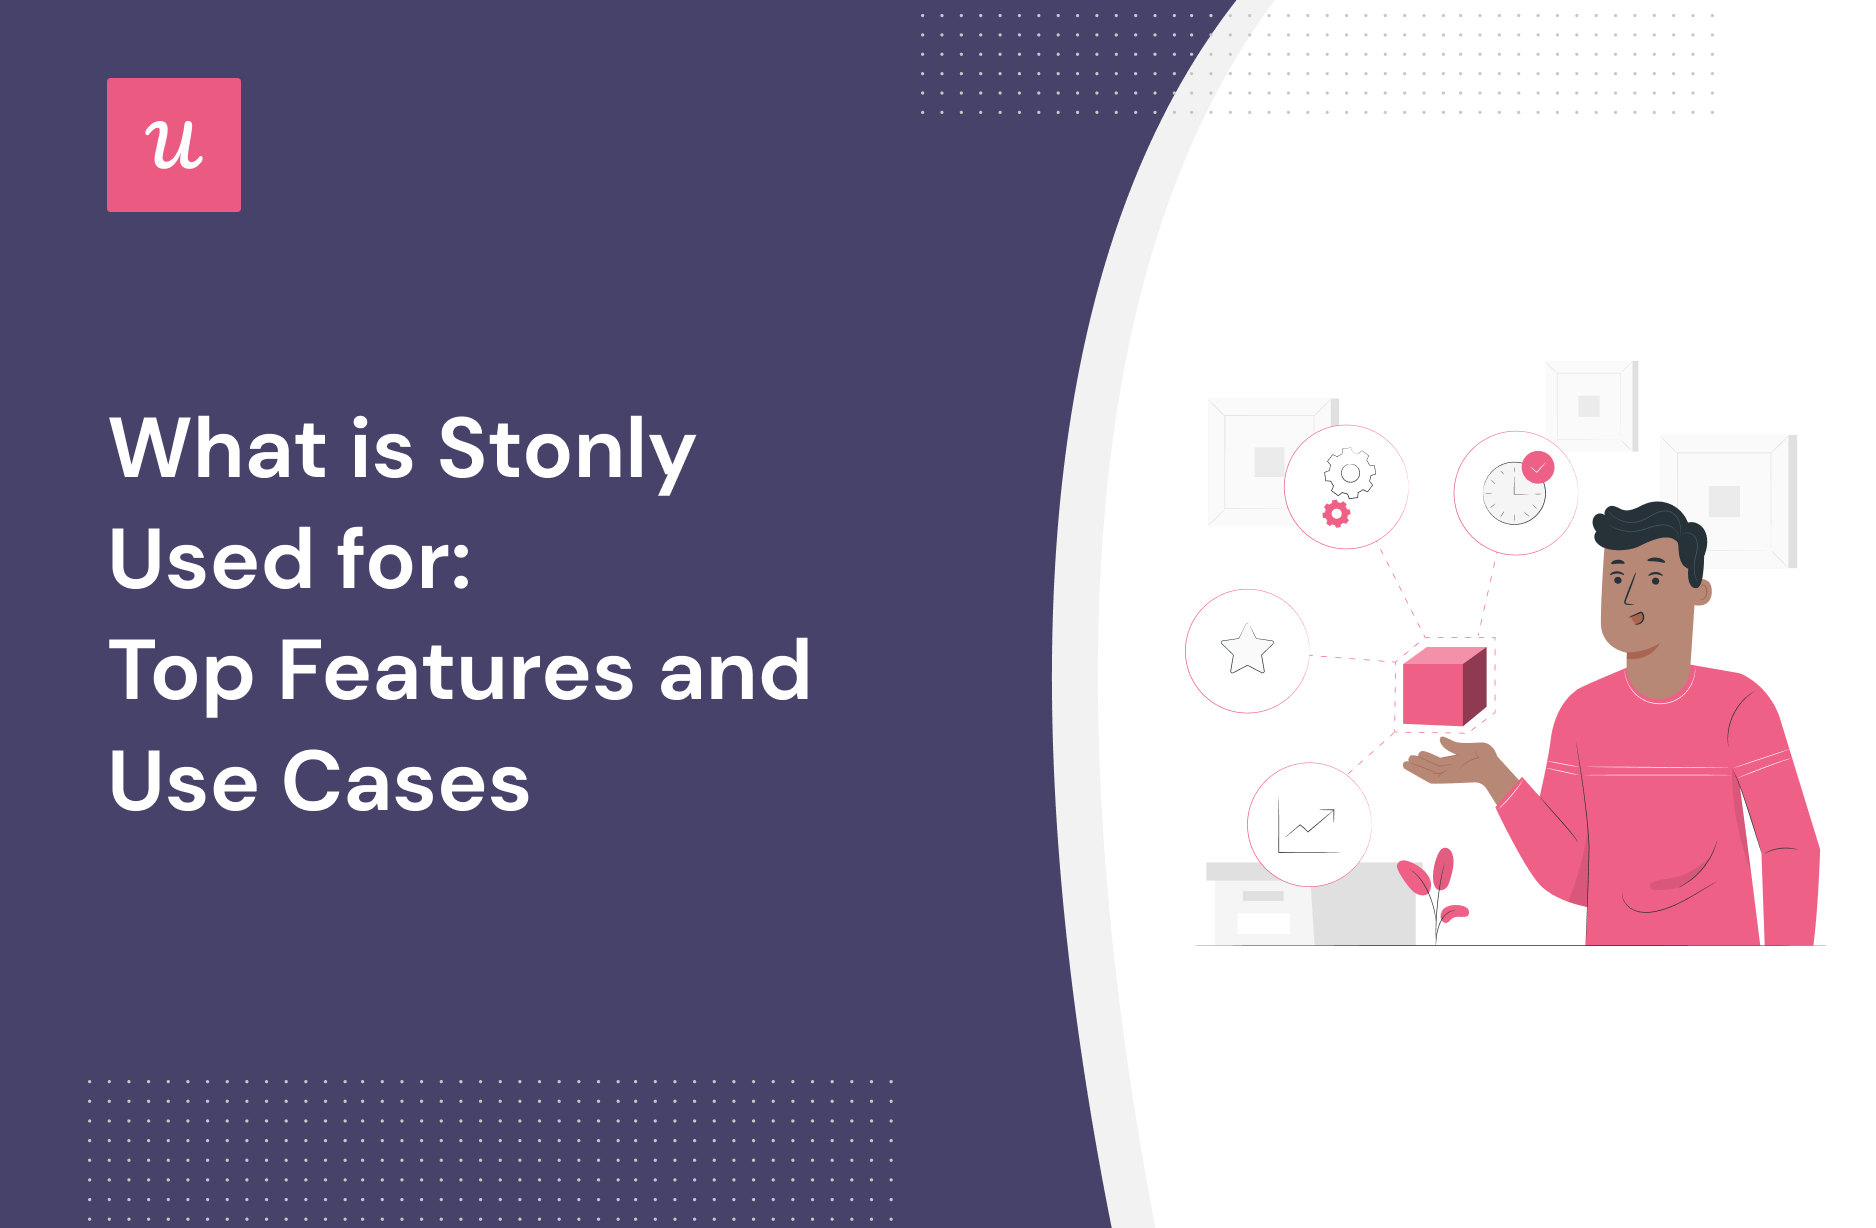 What Is Stonly Used For: Top Features and Use Cases